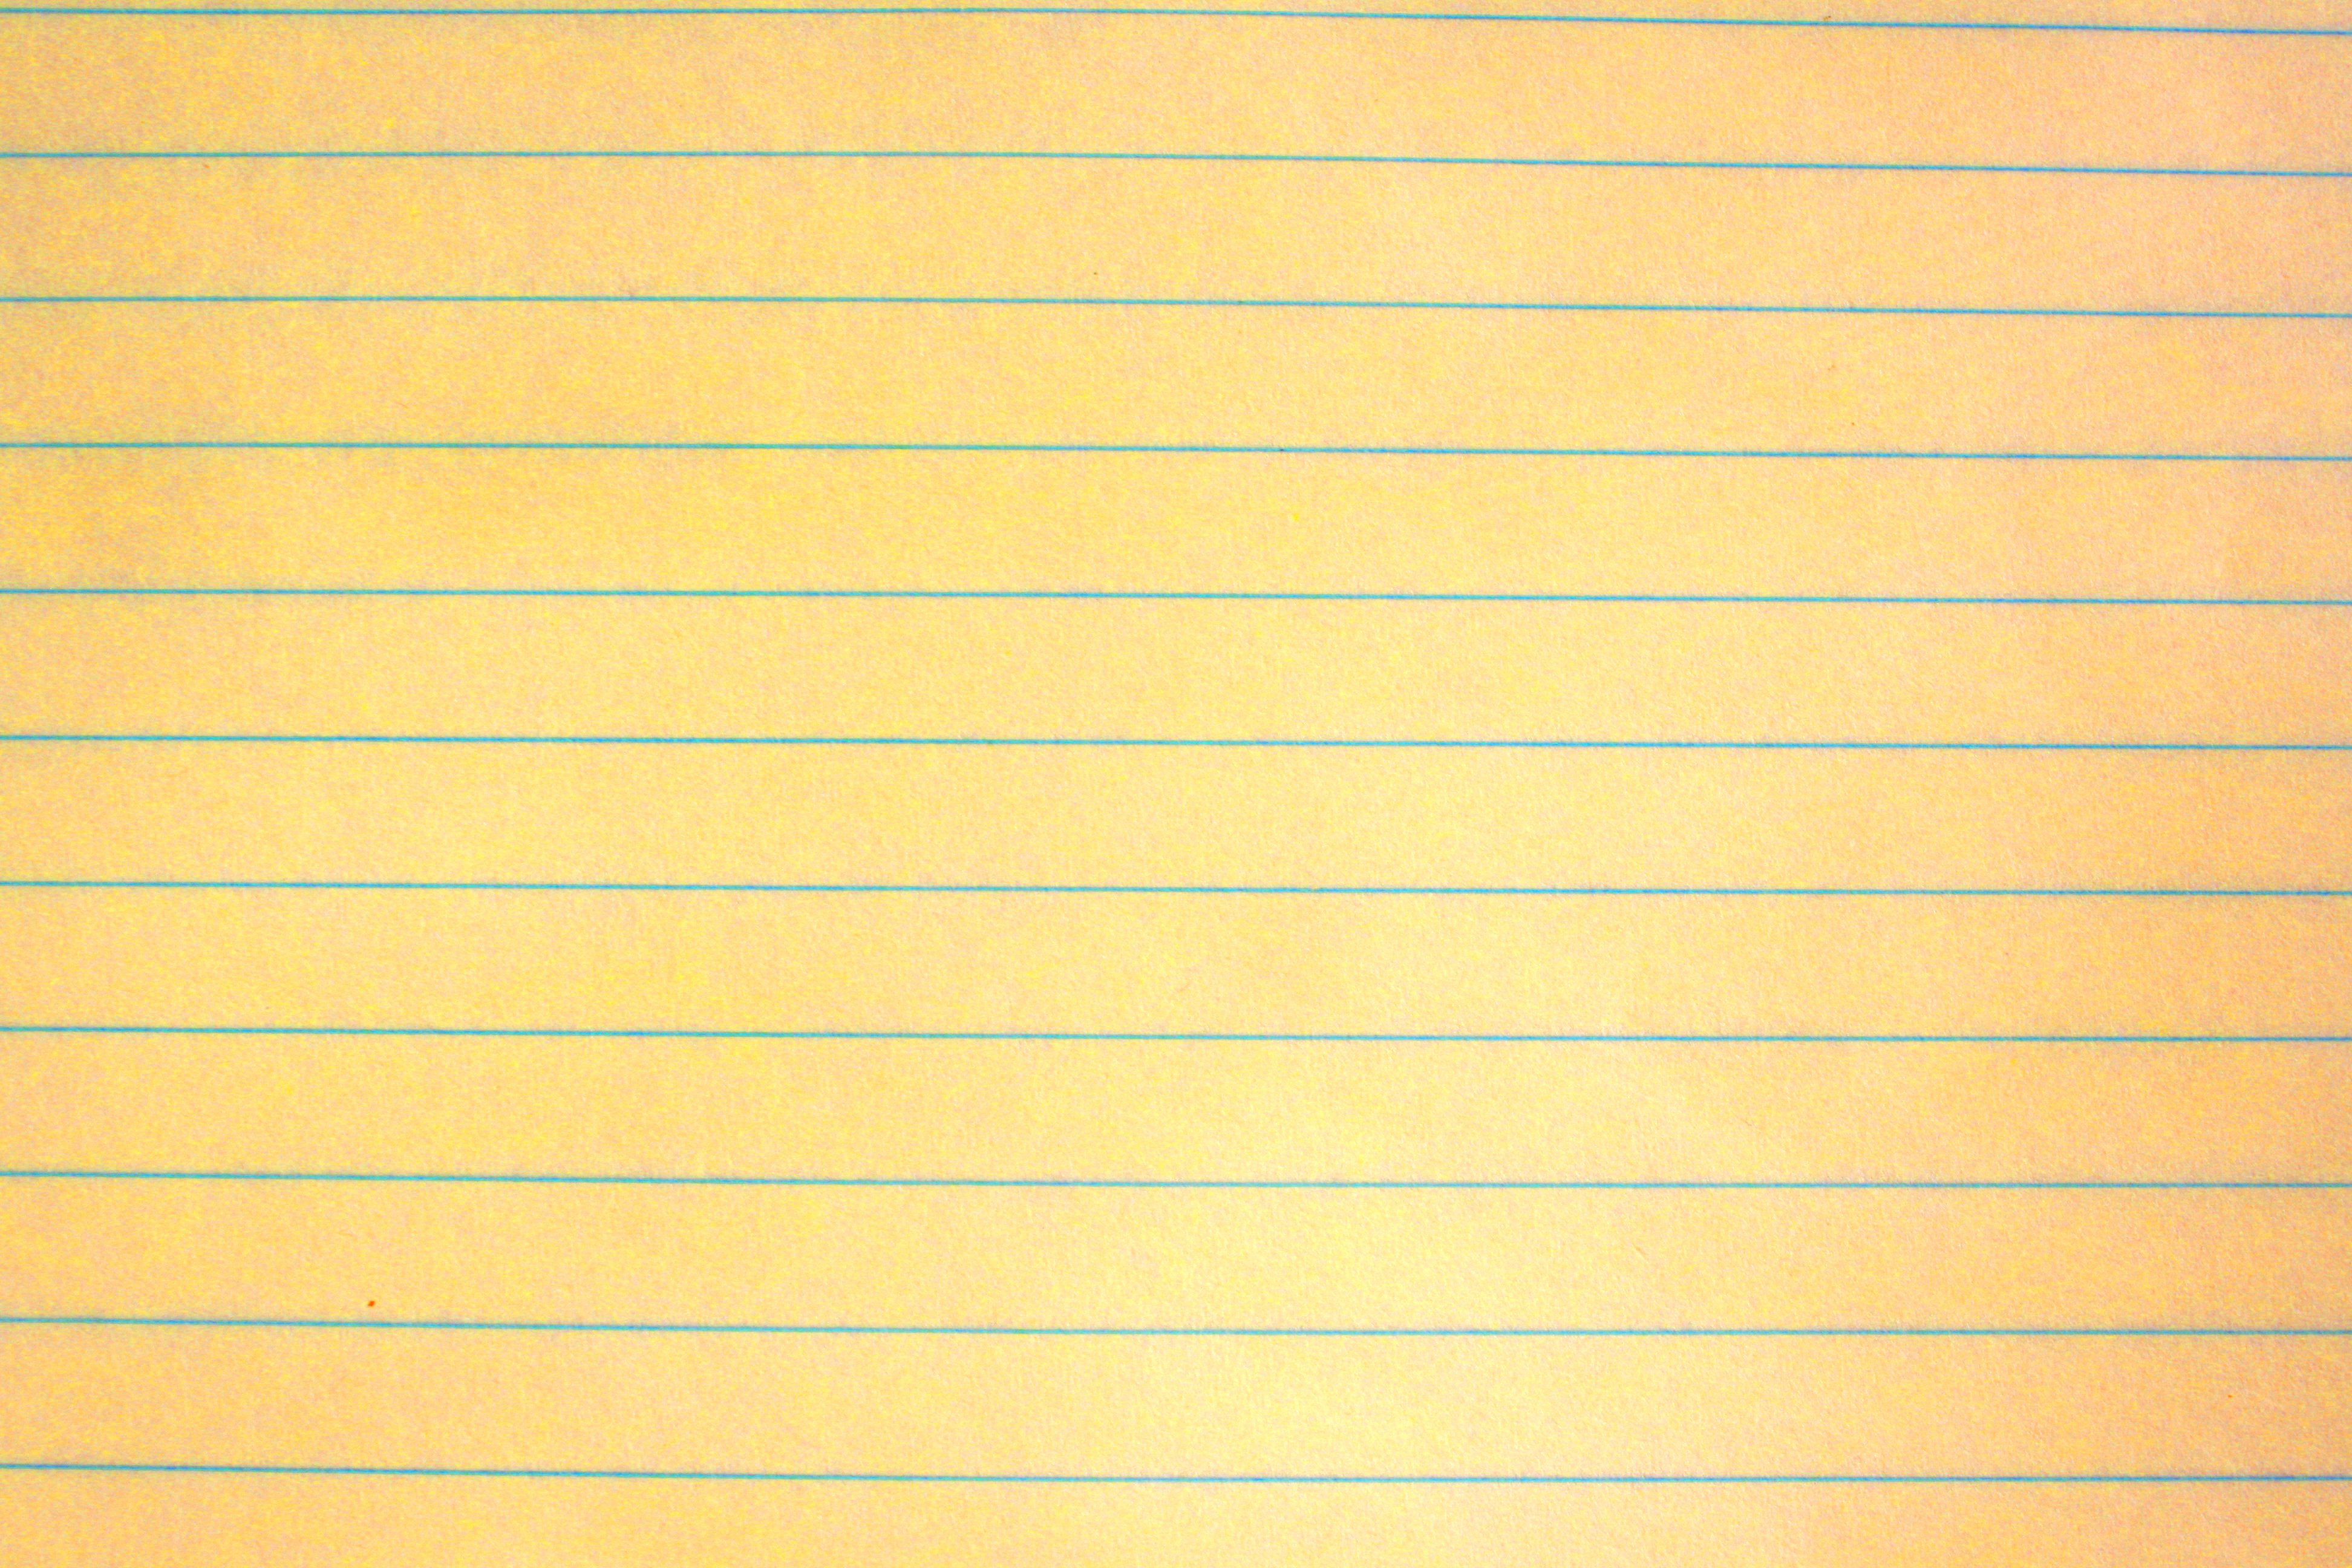 Yellow Notebook Paper Texture